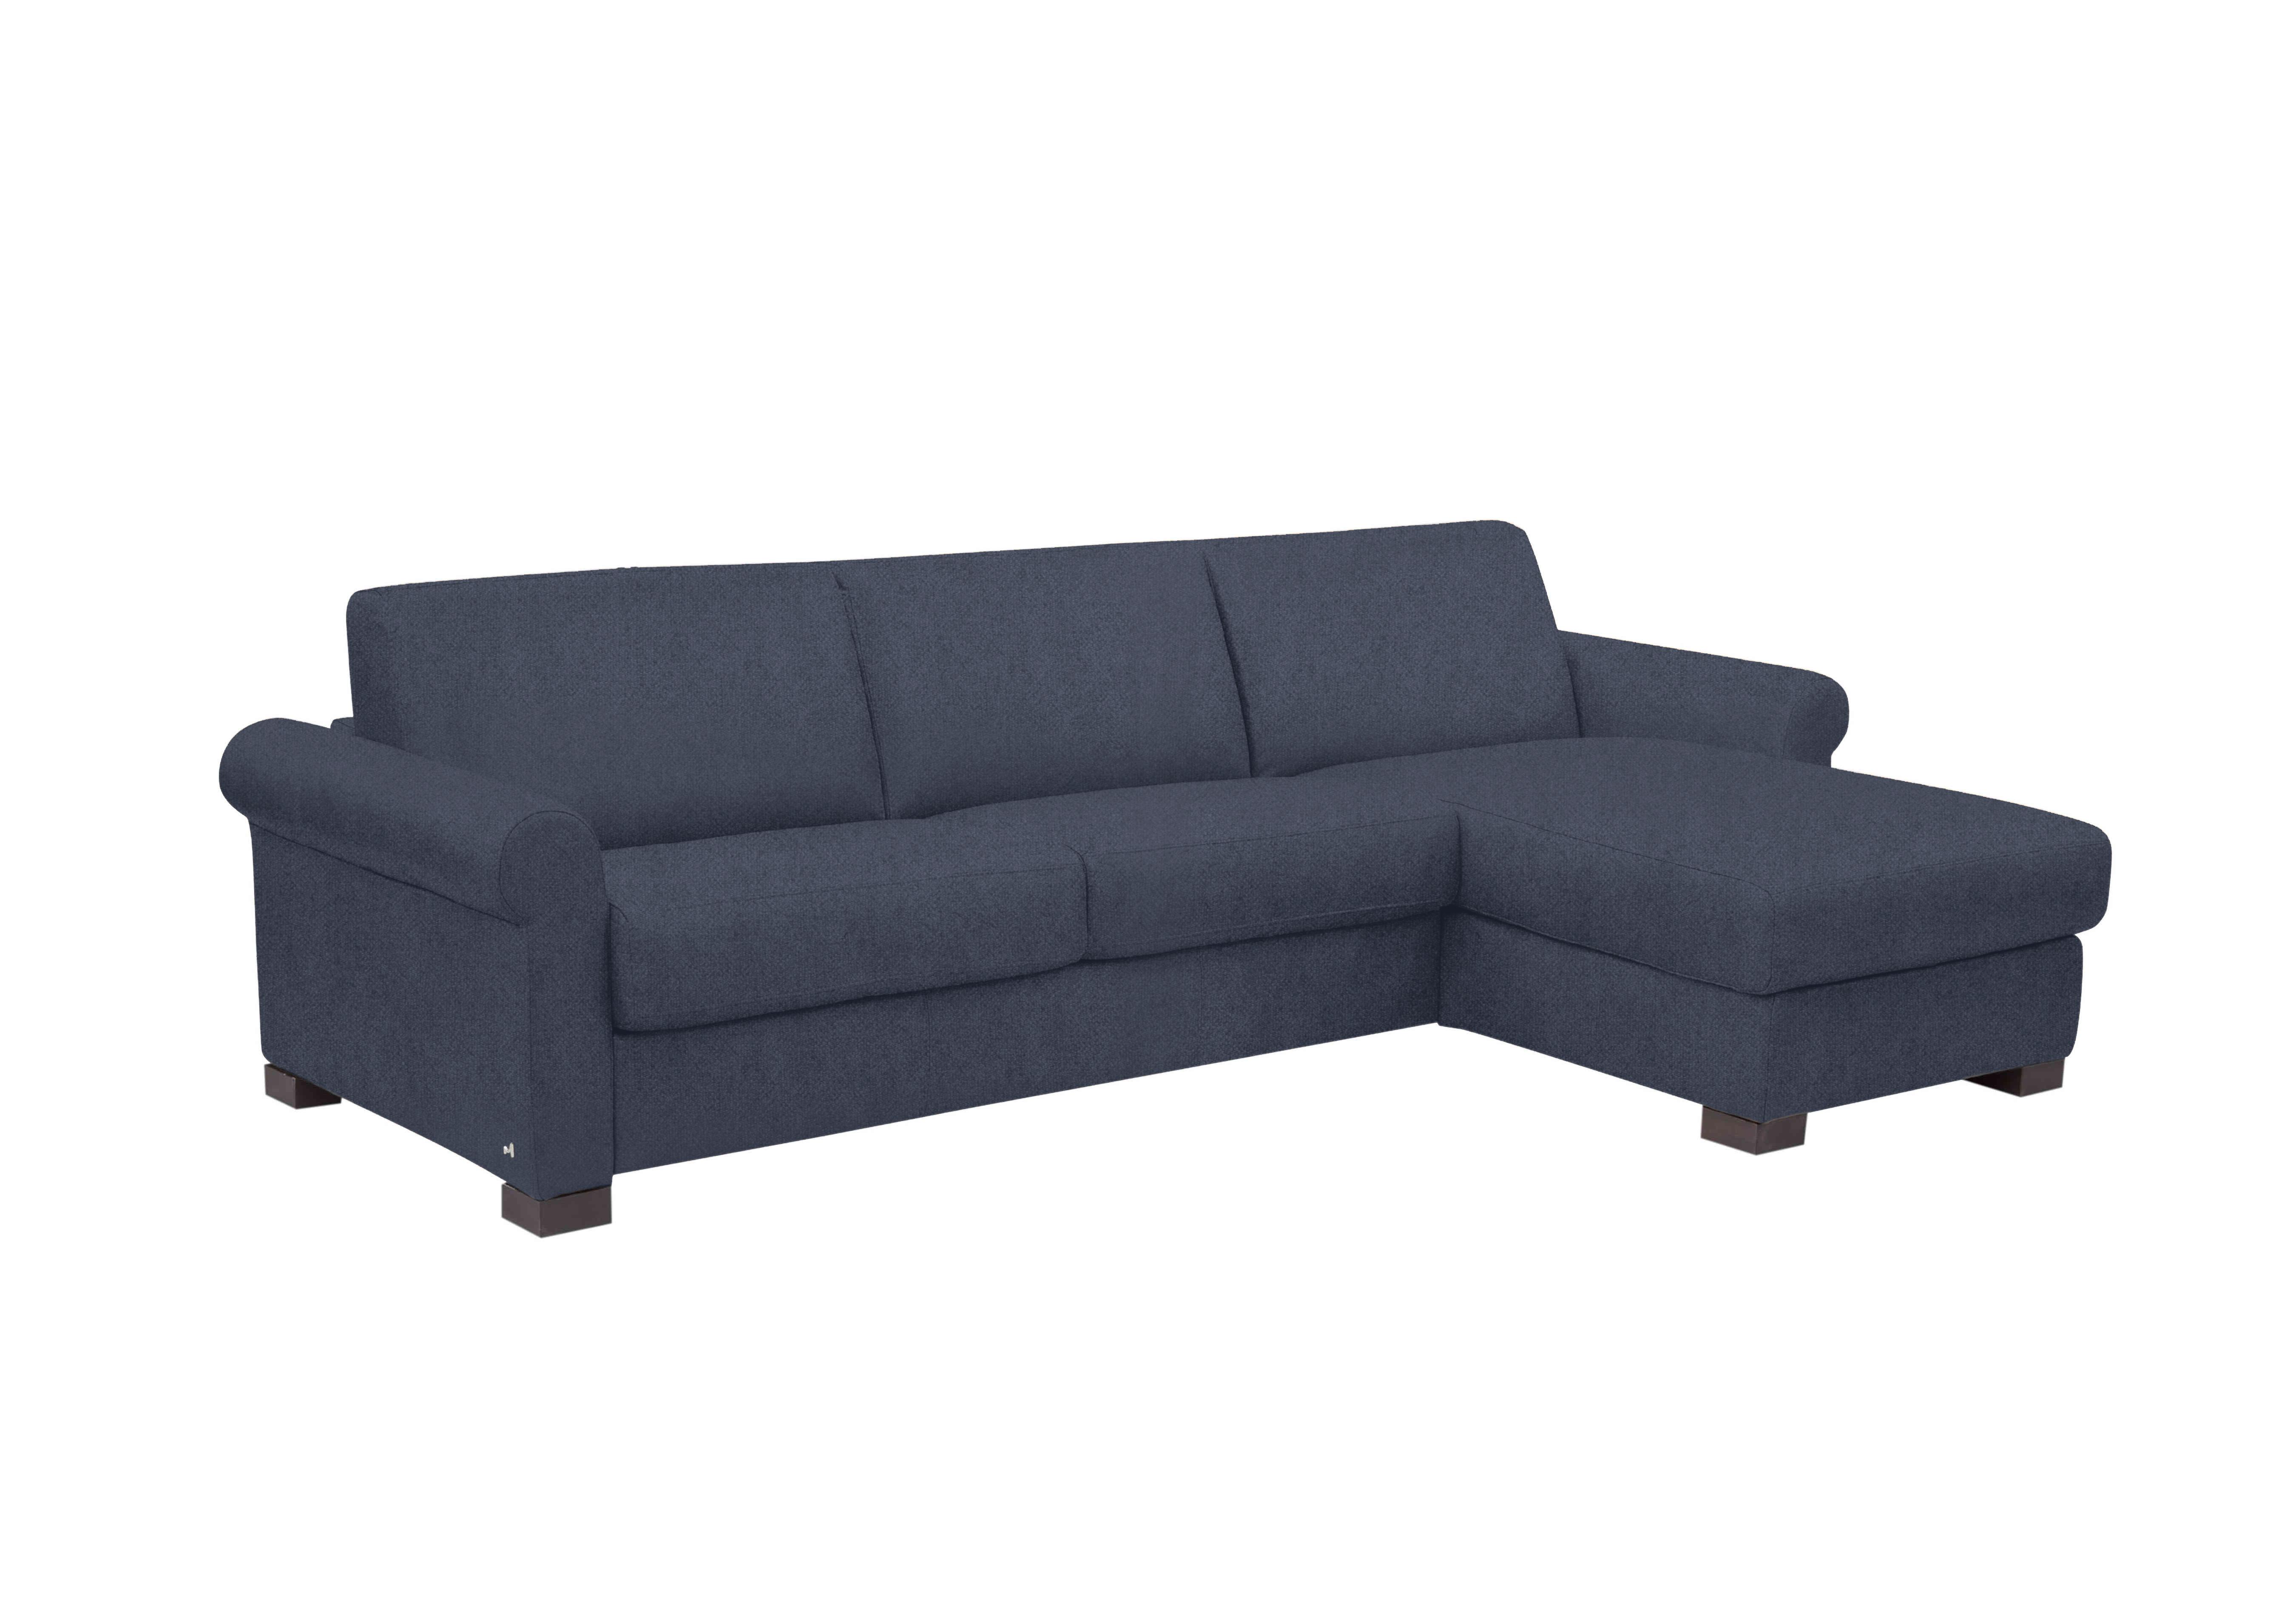 Alcova 3 Seater Fabric Sofa Bed with Storage Chaise with Scroll Arms in Fuente Ocean on Furniture Village